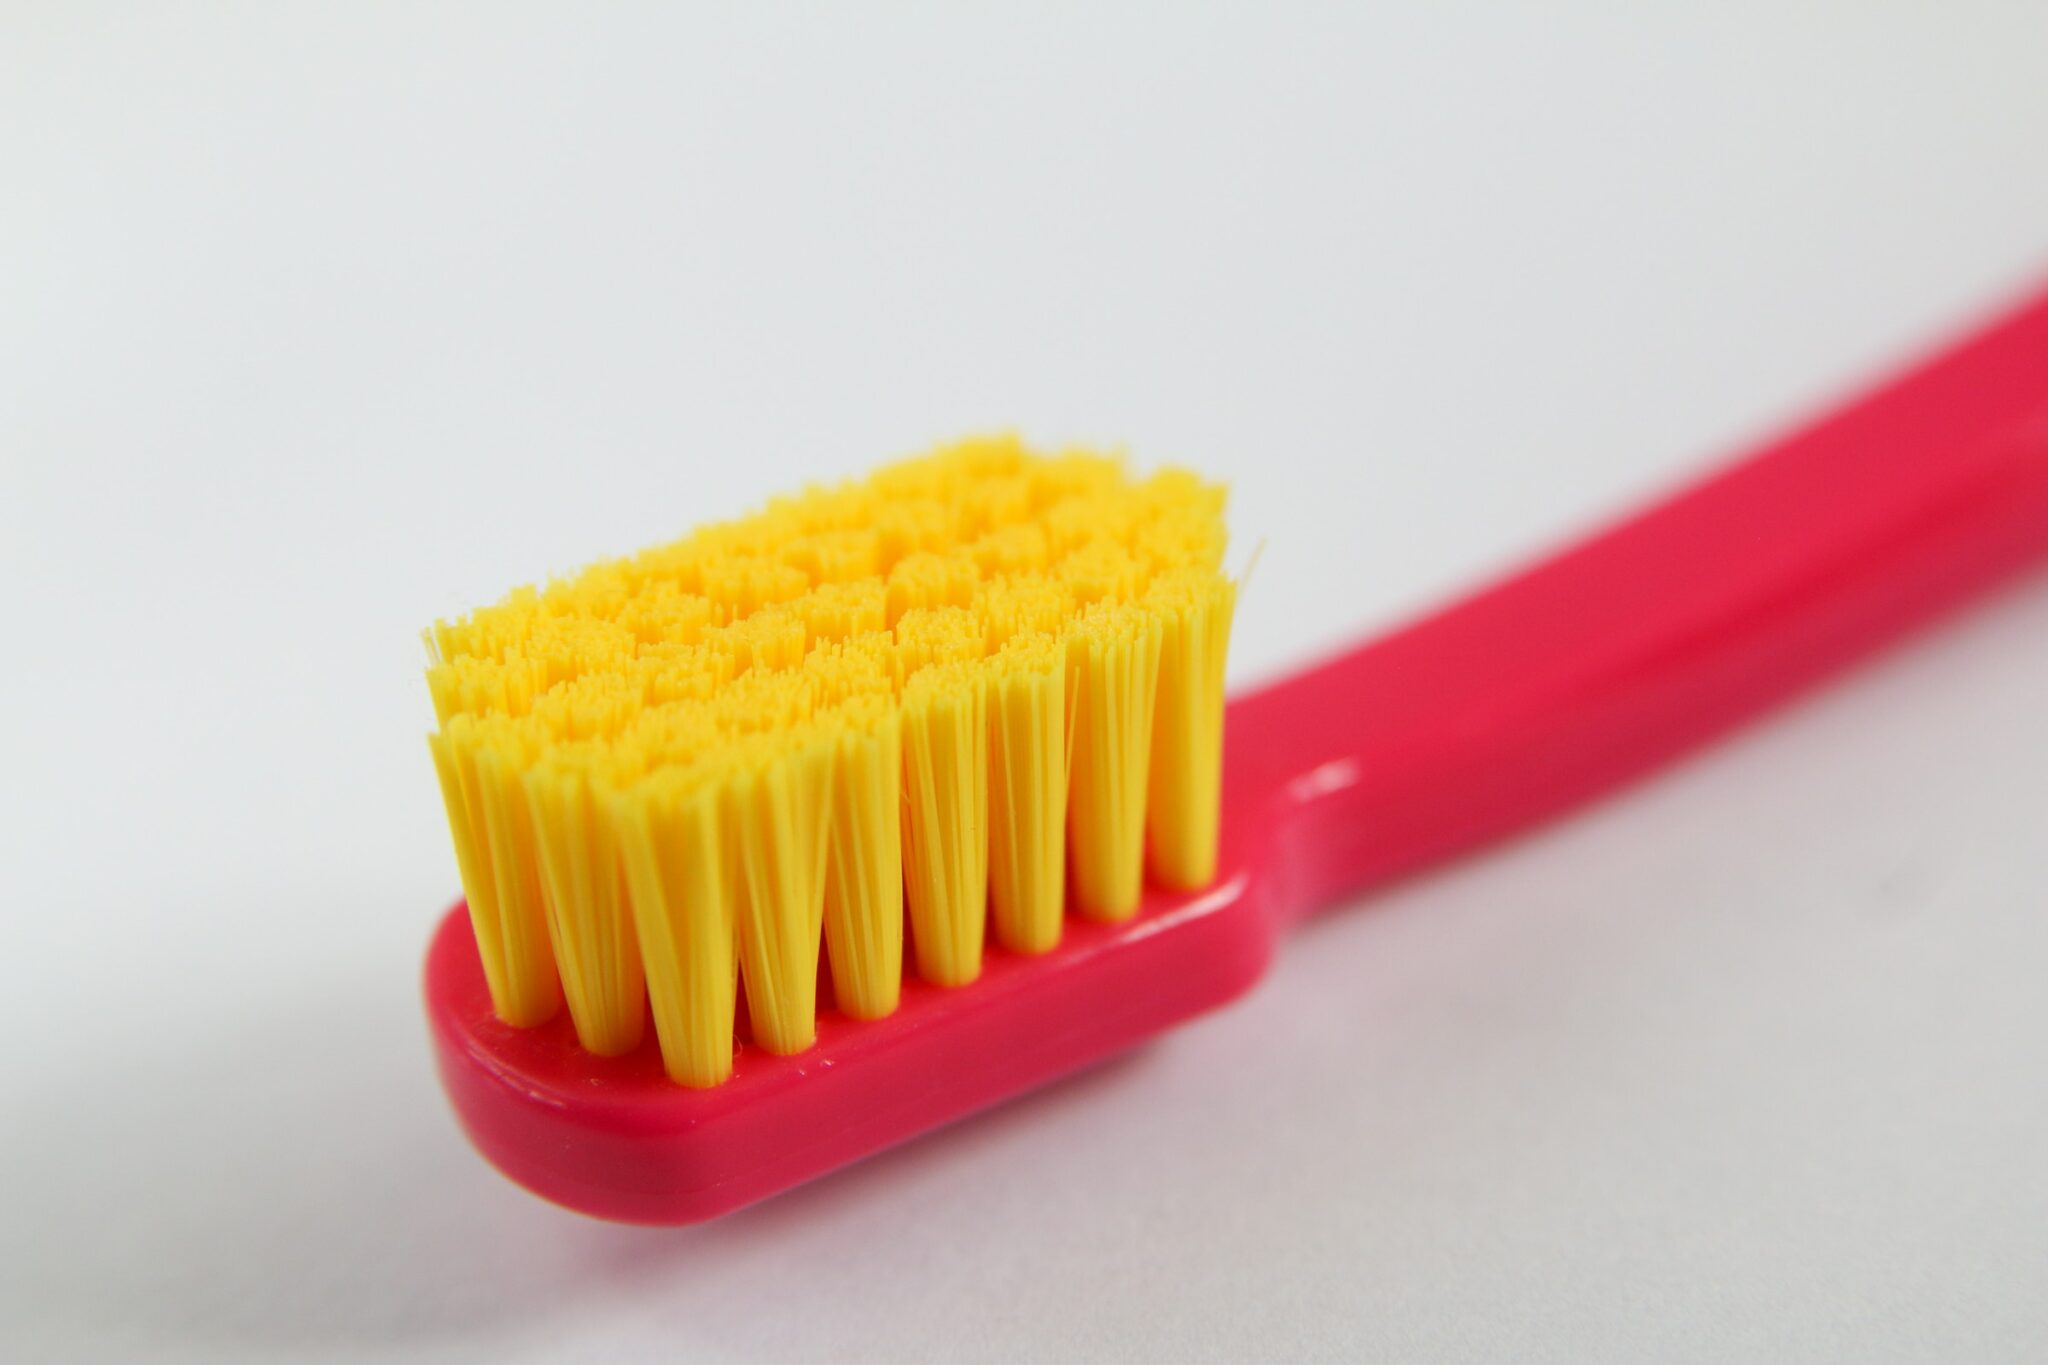 “When can my child start brushing his own teeth?” and Other FAQs about Kids’ Oral Hygiene